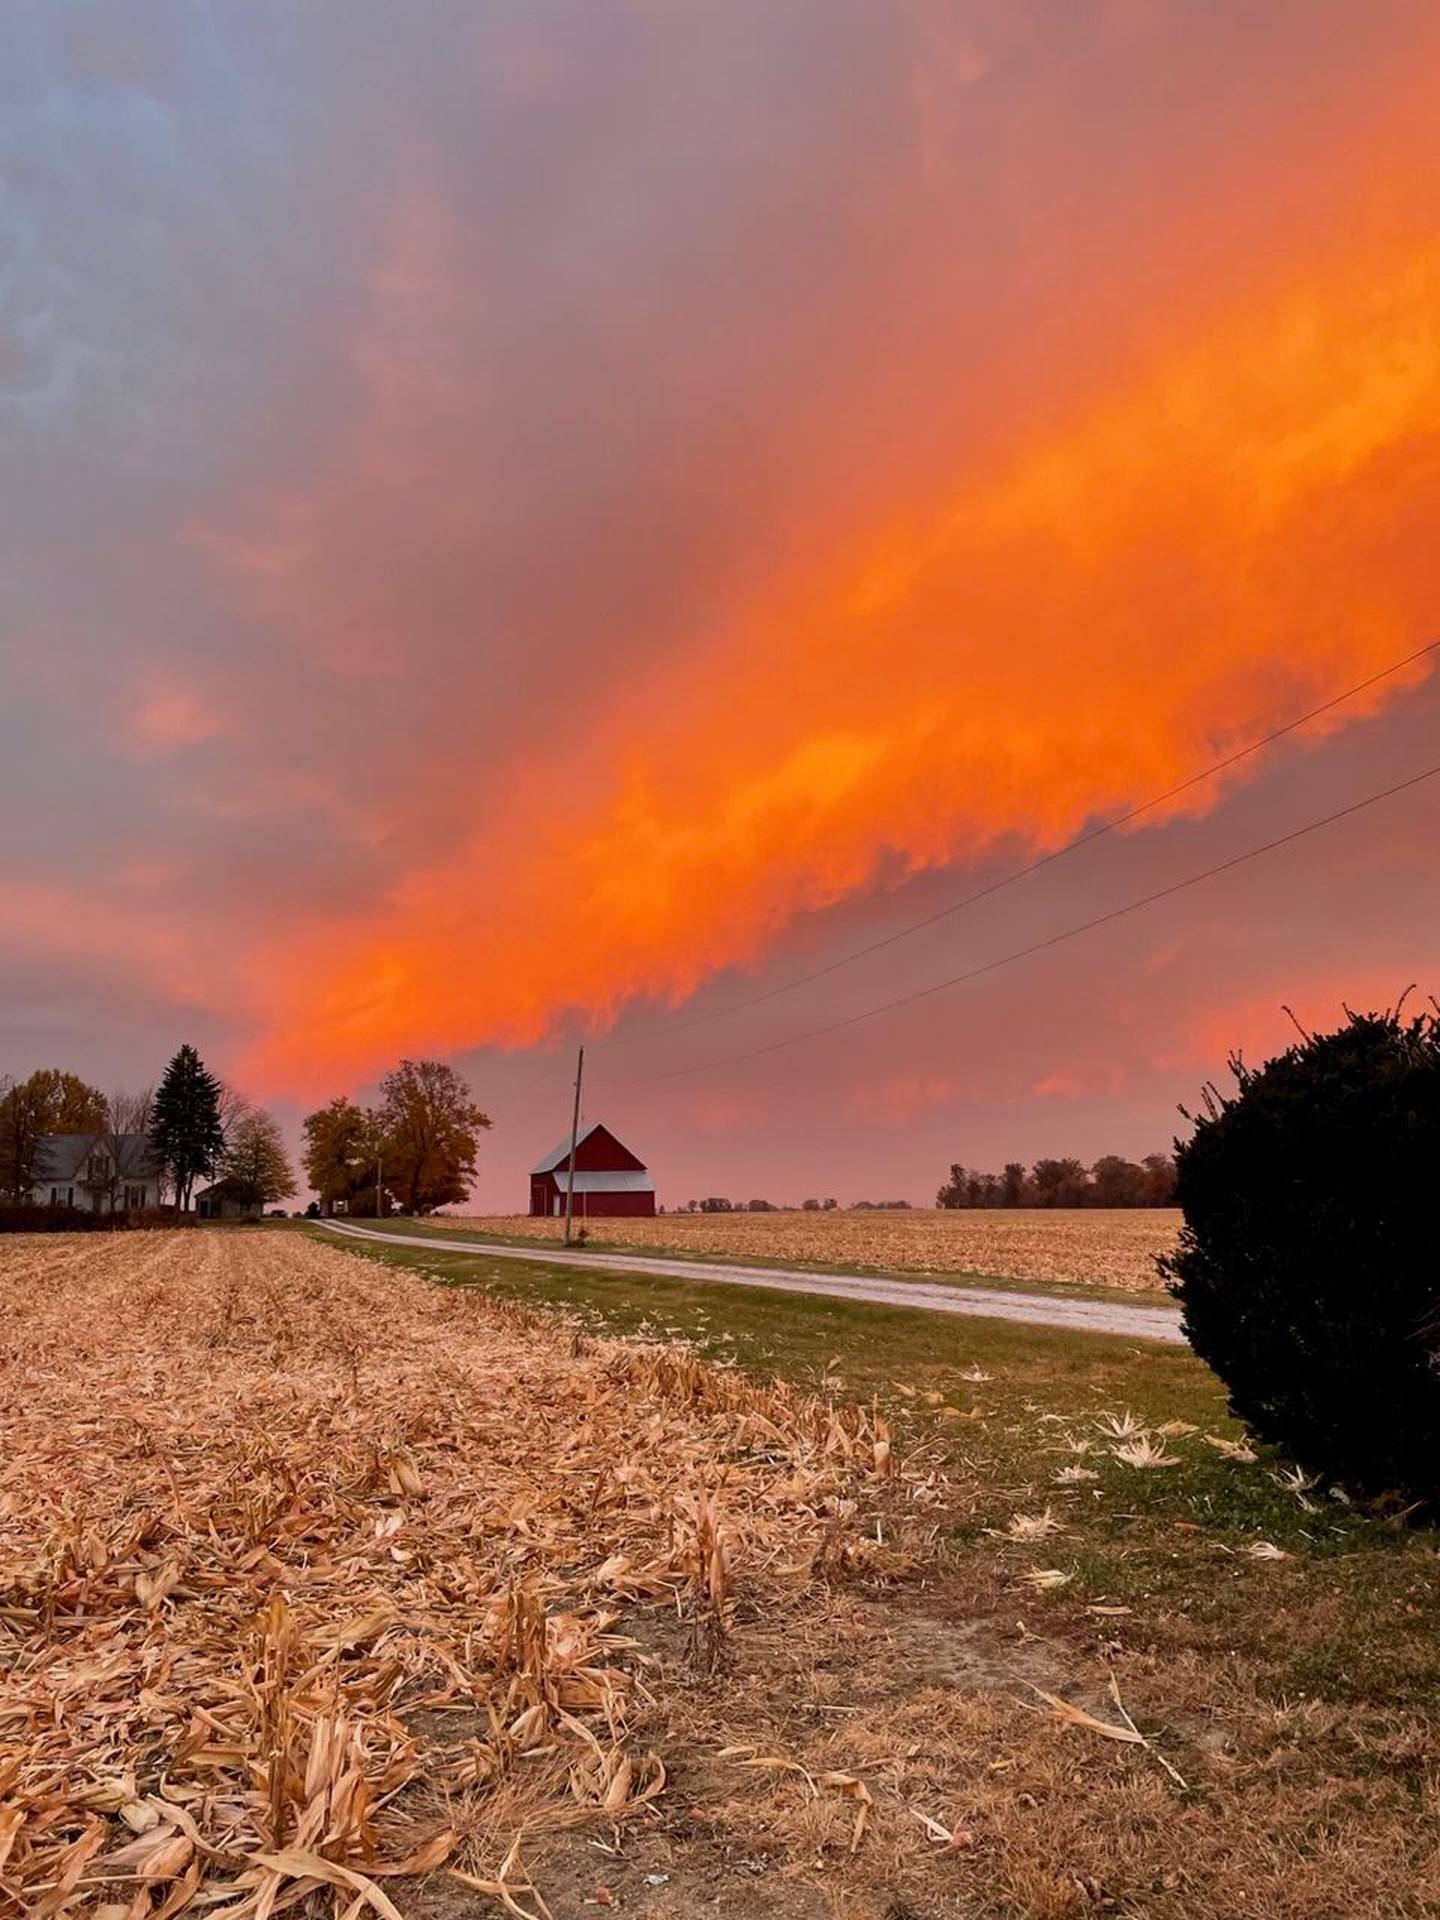 “Spectacular Clouds” — Elizabeth Harner: “A grand cloud display over our last field at harvest.”